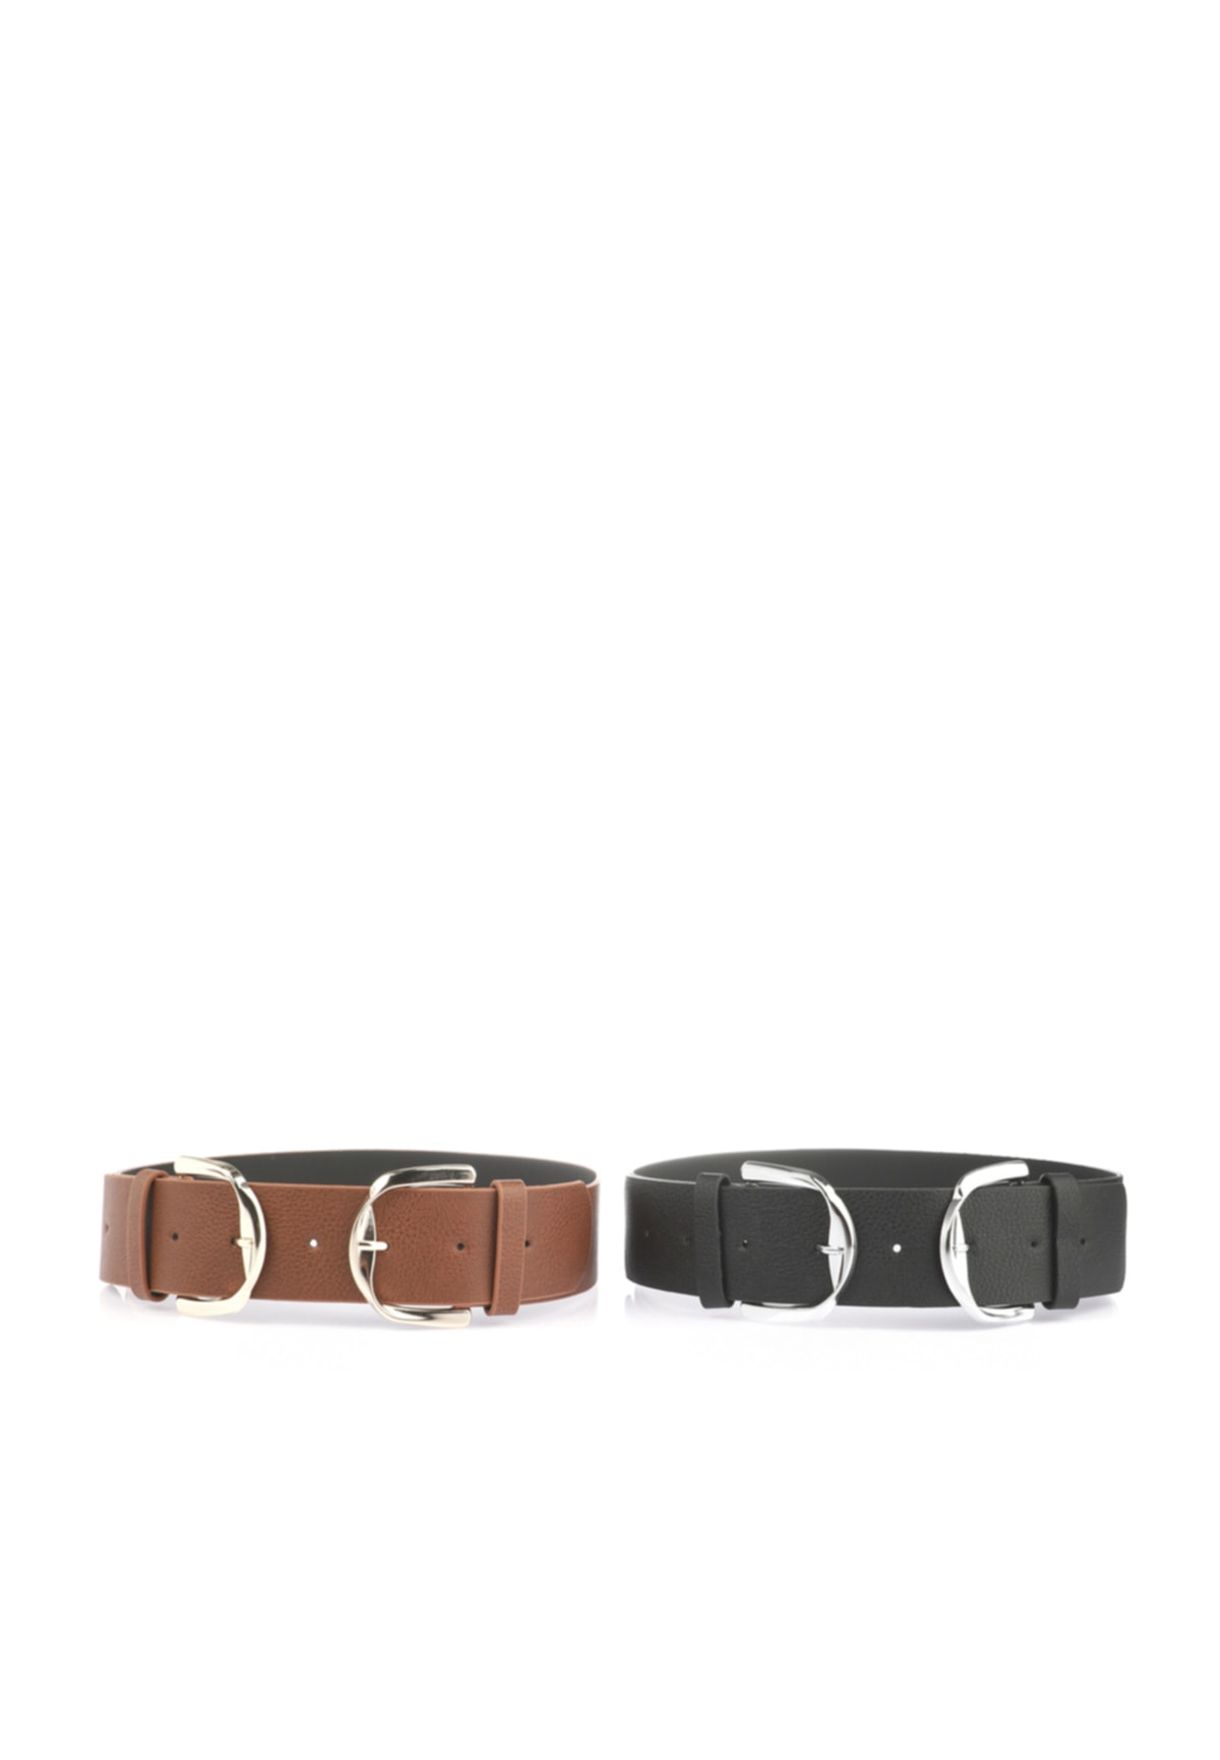 2 Pack Allocated Hole Belt